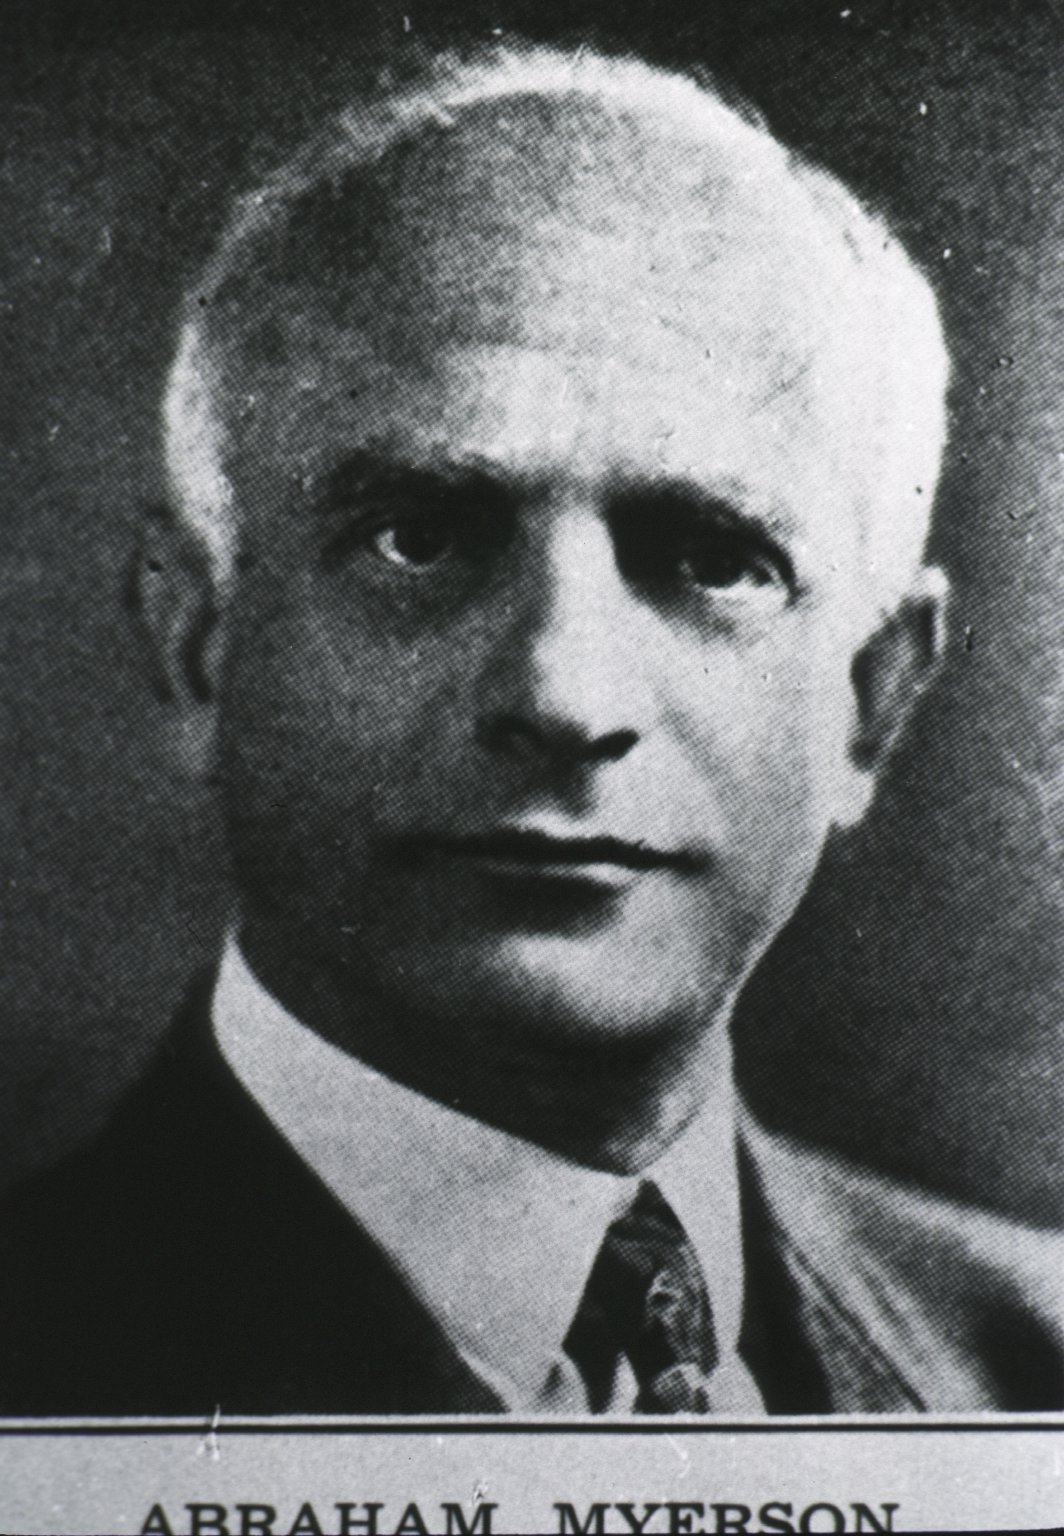 Image of A. Myerson